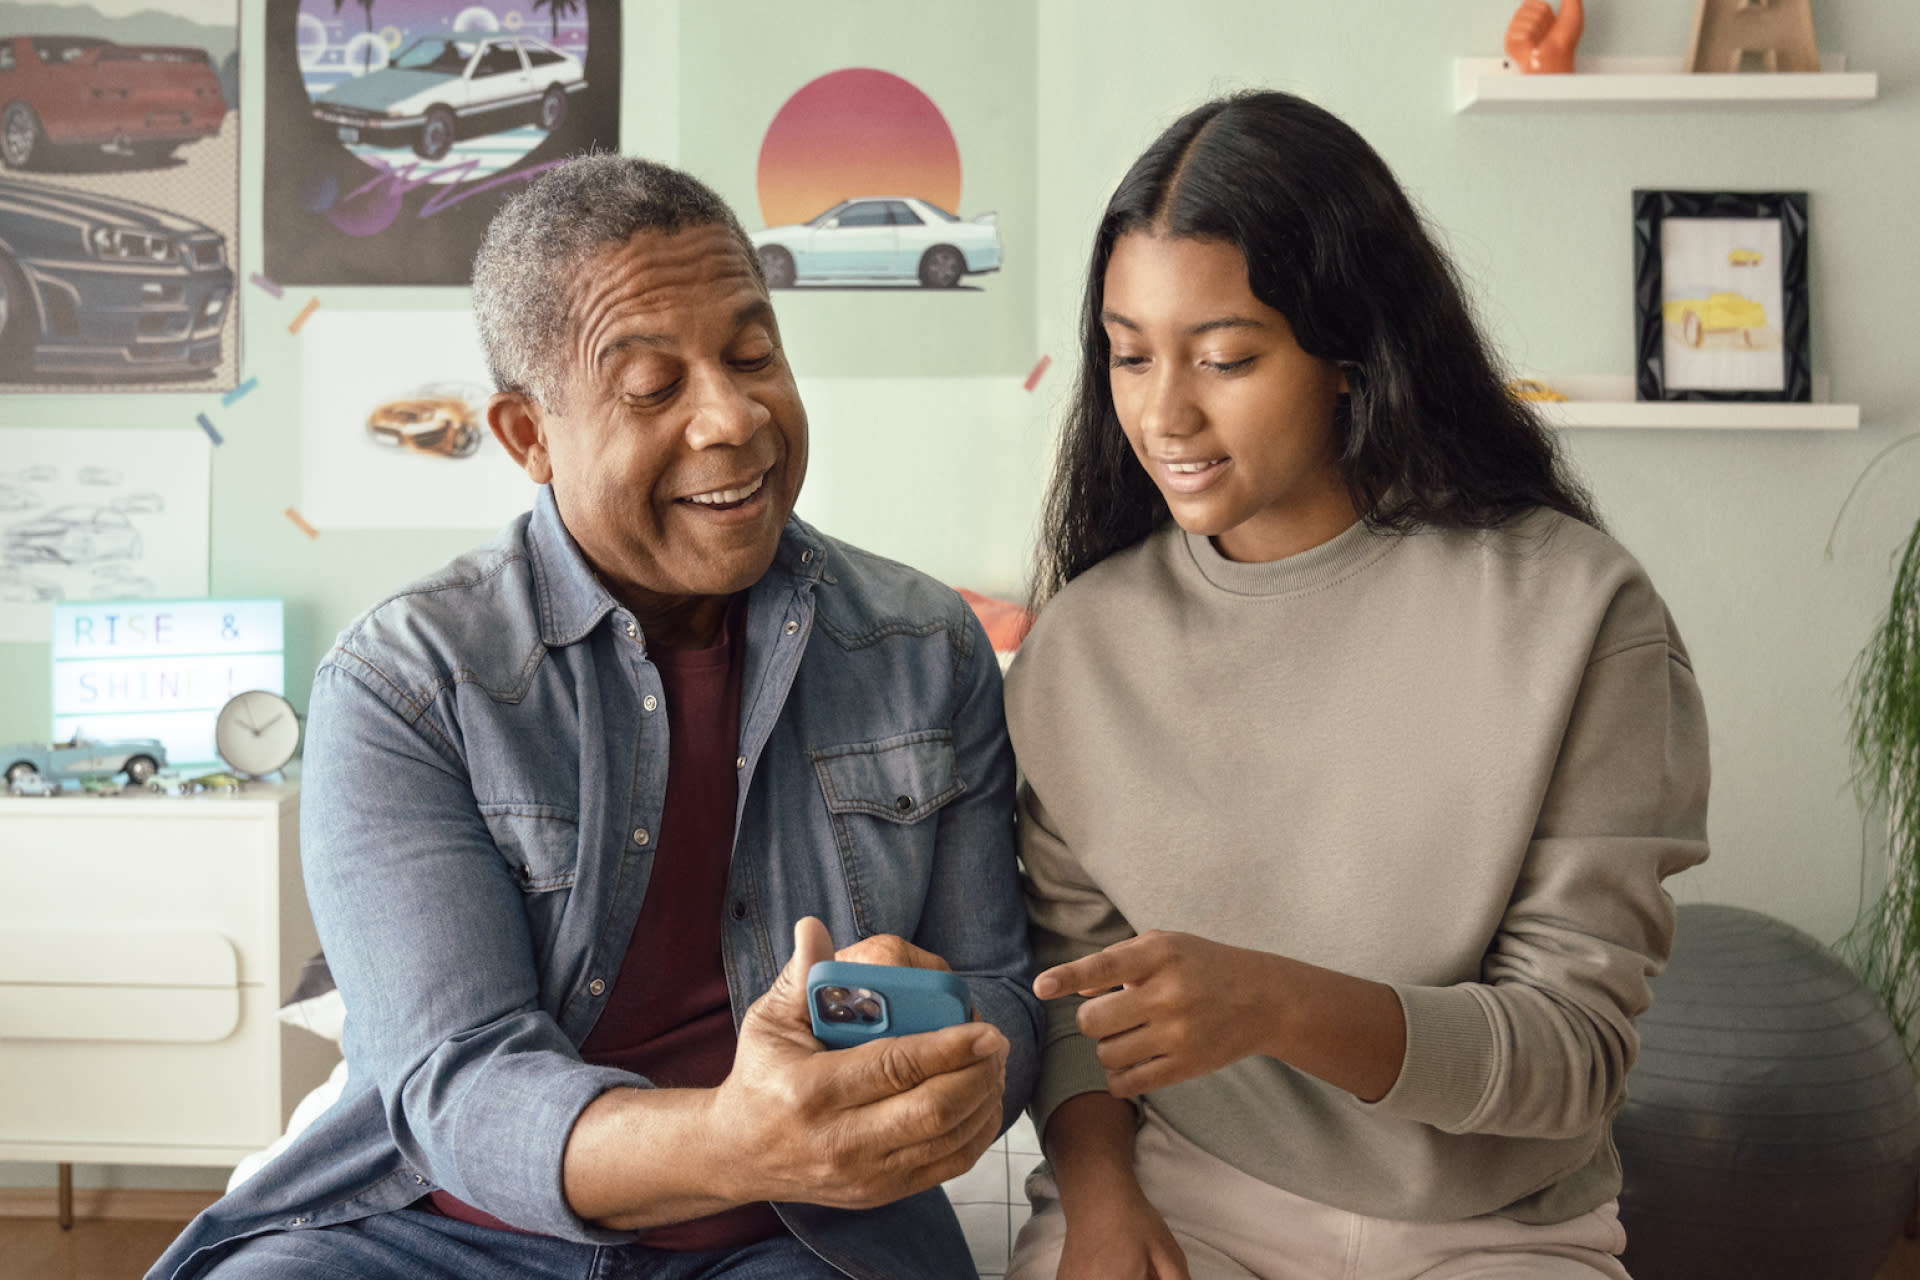 Greenlight father and daughter looking at app to invest for college costs and offset financial aid